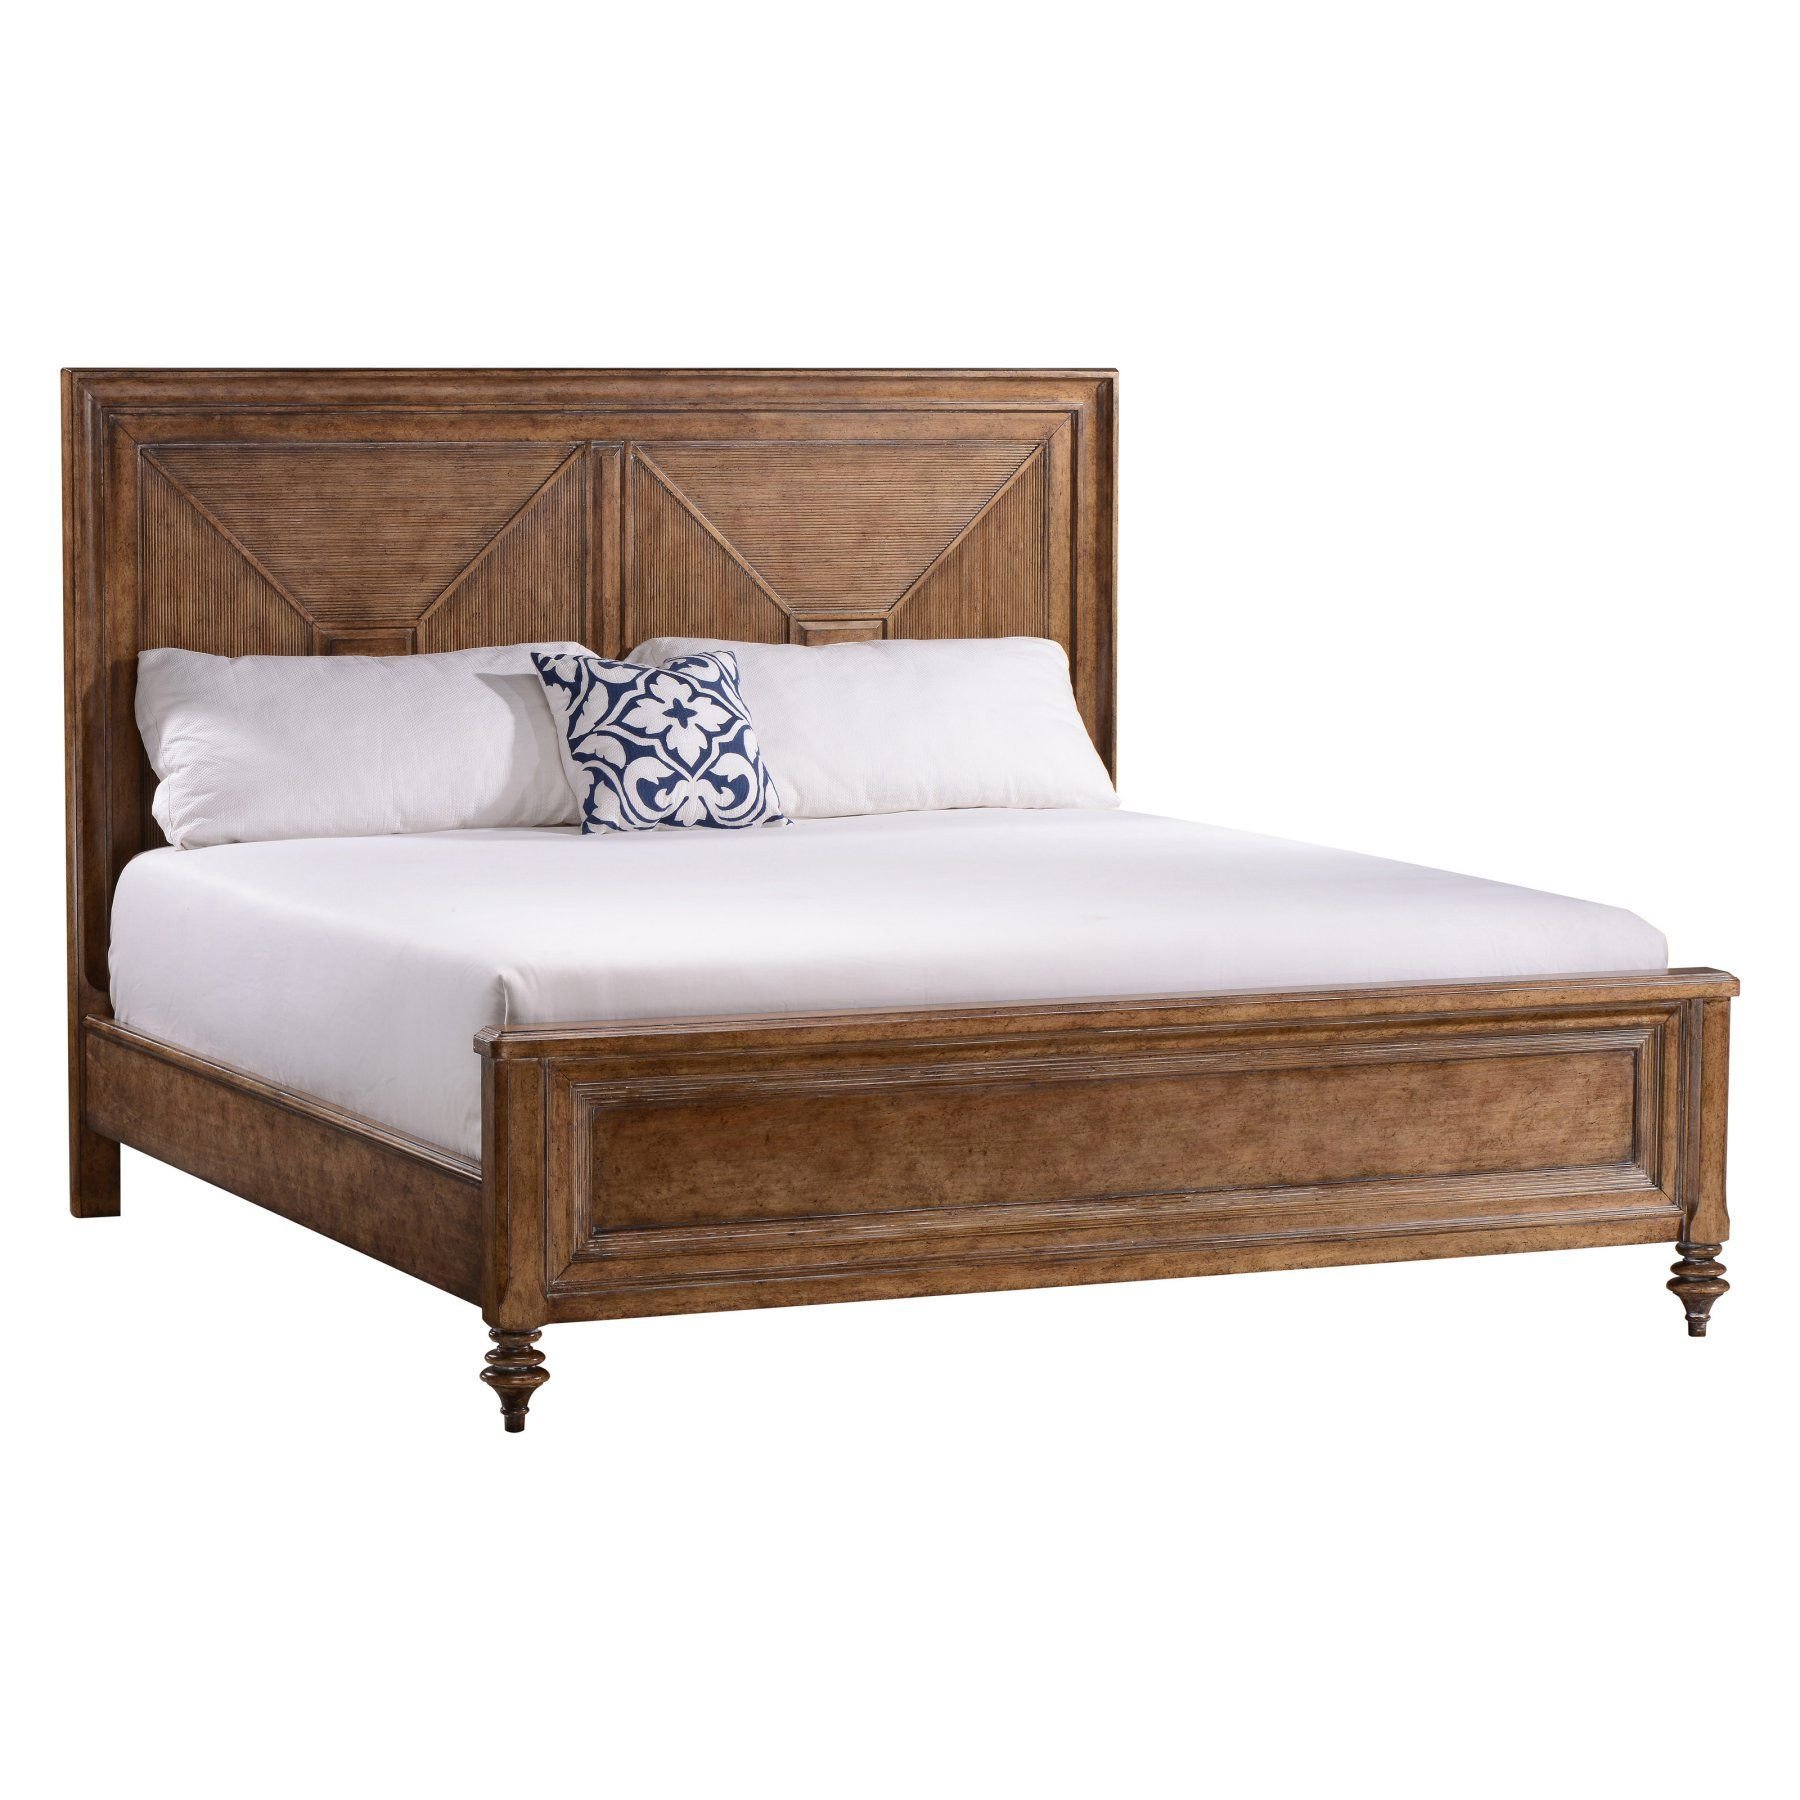 Where to Buy Bedroom Furniture Inspirational A R T Furniture Pavilion Panel Bed 2608